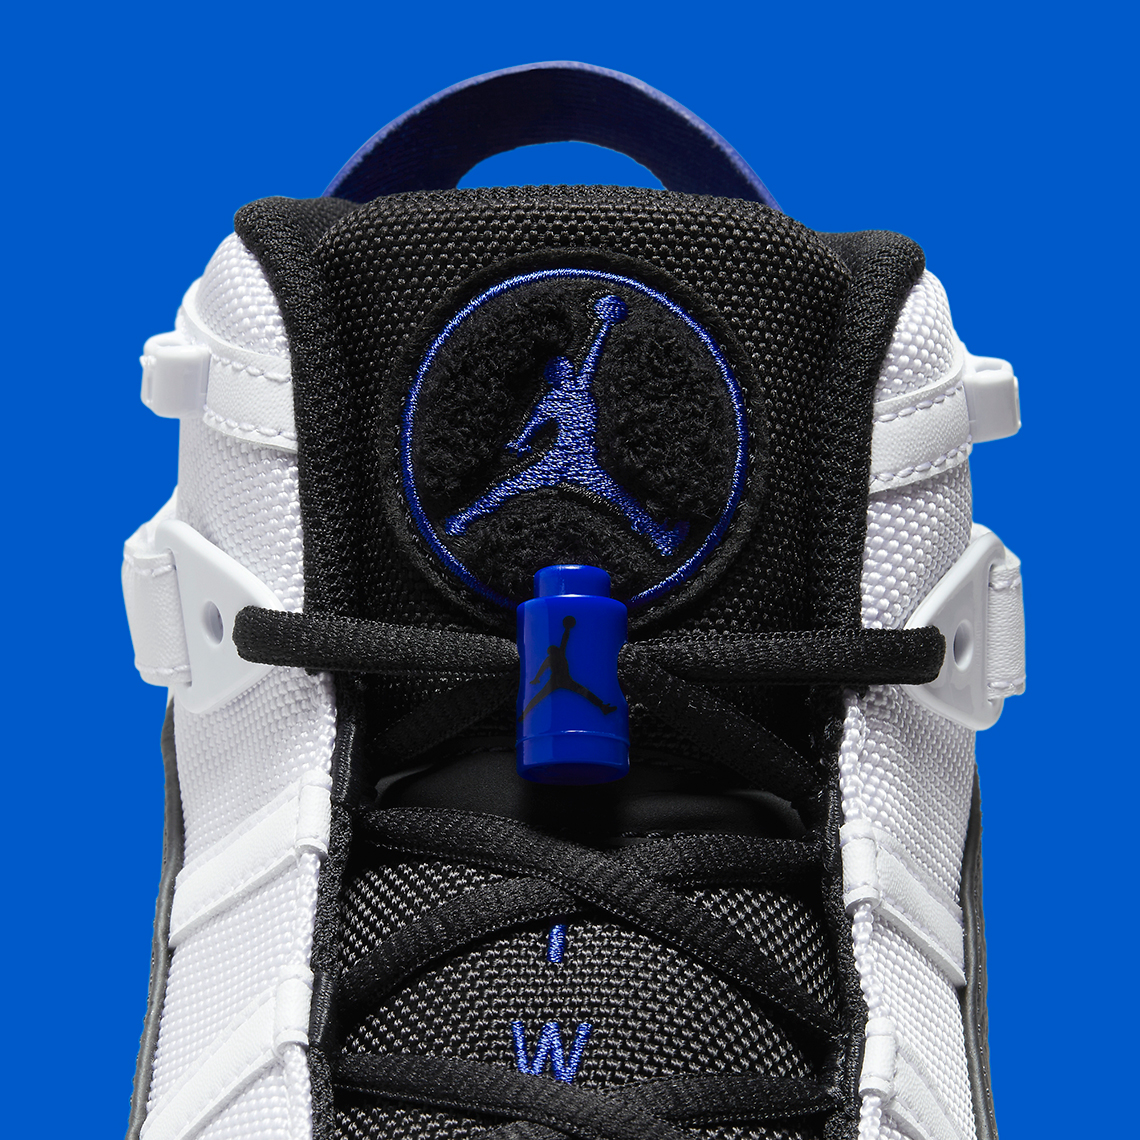 As Jordan Brand continues to expand on their upcoming Black White Game Royal 322992 142 1